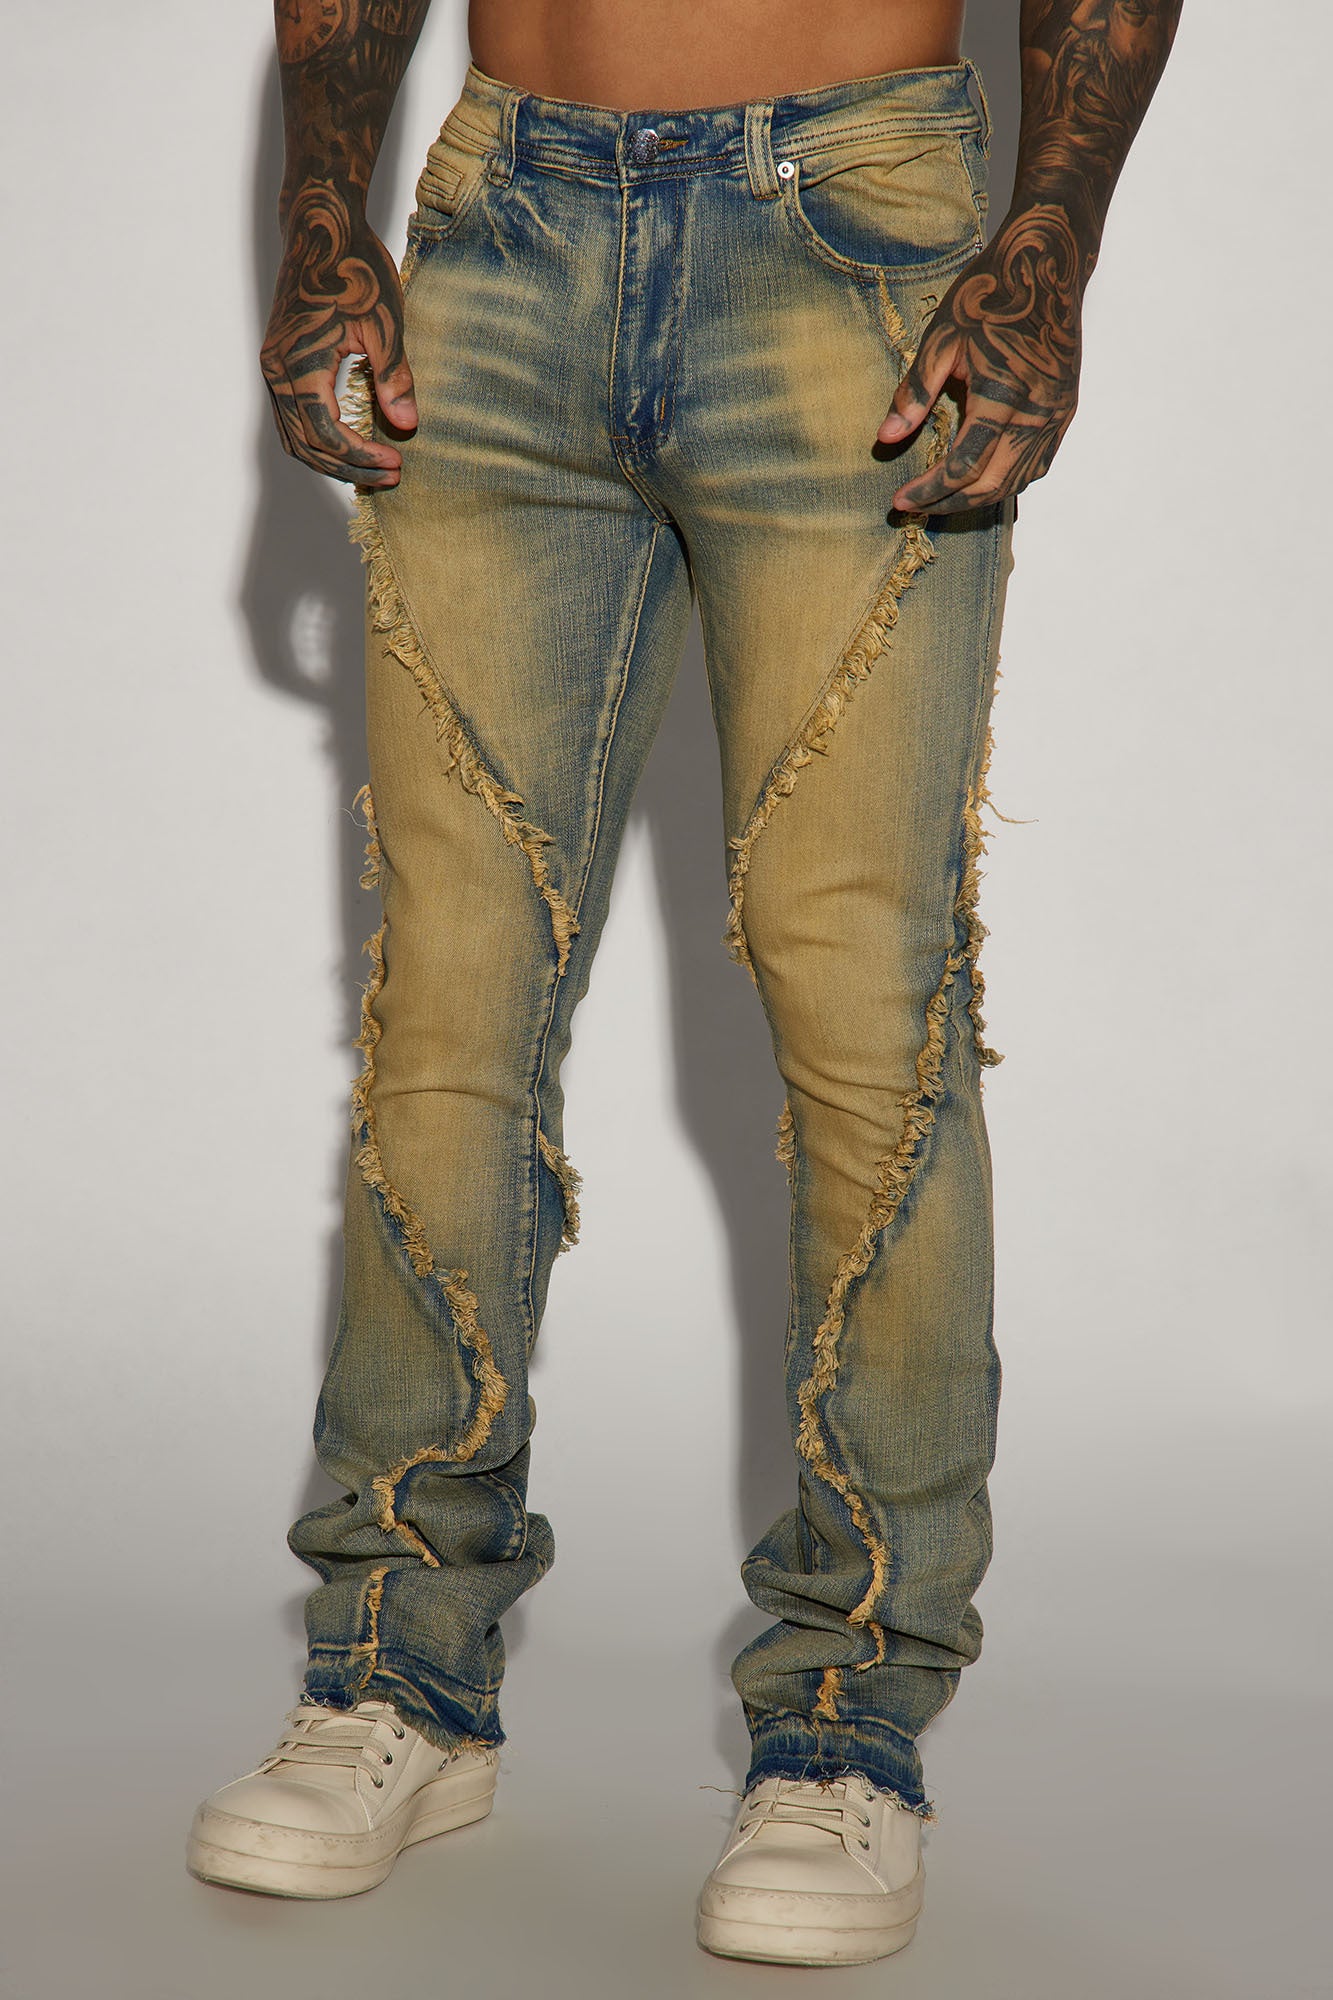 About Fray Stacked Skinny Flare Jeans - Black Wash